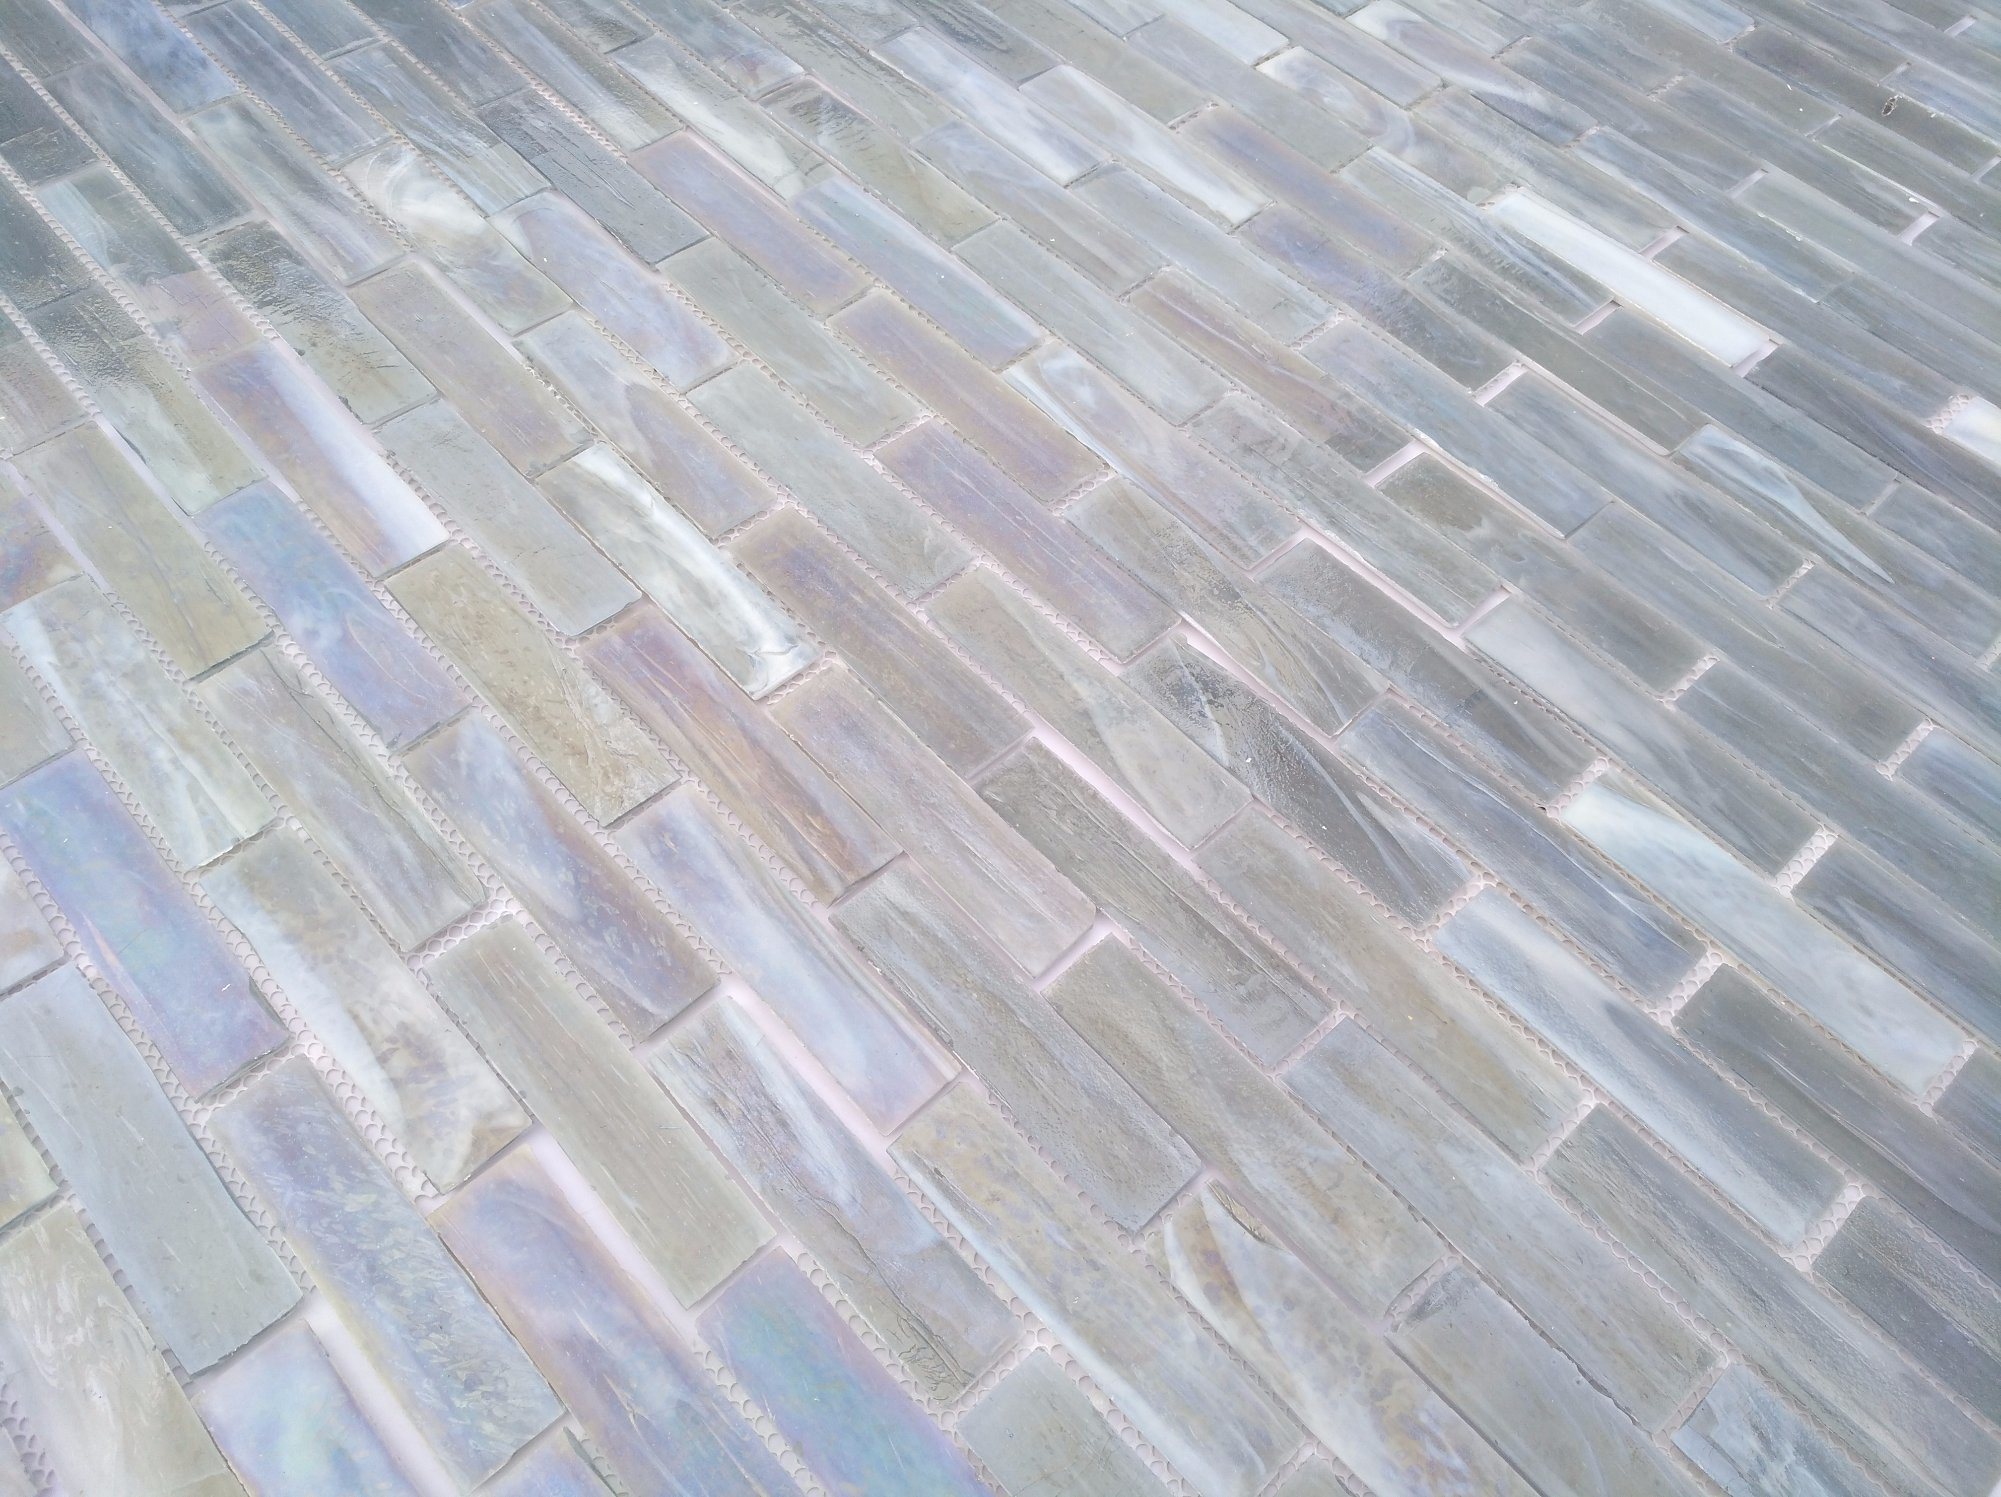 New Linear Stained Art Glass Mosaic Tile for Home Hotel Deco